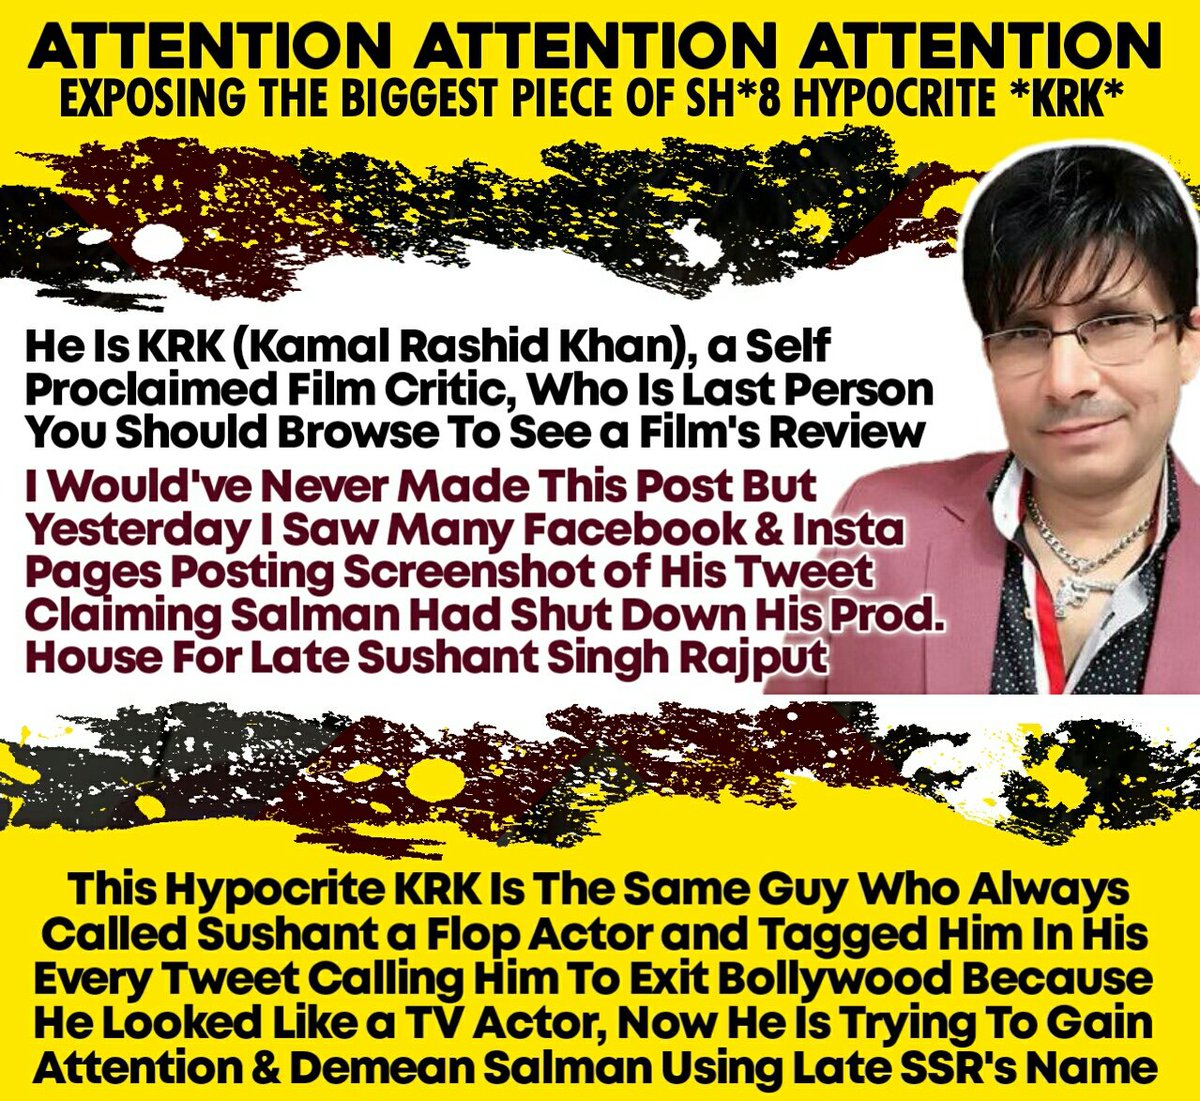 EXPOSING "KRK" - 1Salman Fans, DON'T IGNORE You All MUST RETWEET This Thread Where I'm Gonna Expose The Real Culprit KRK!KRK is The Same Guy Who Used To Bully Sushant On Twitter By Calling Him a C GRADE ACTOR and Now He Is Taking Sympathy! #FakeKRKRealCulpritOfSushant